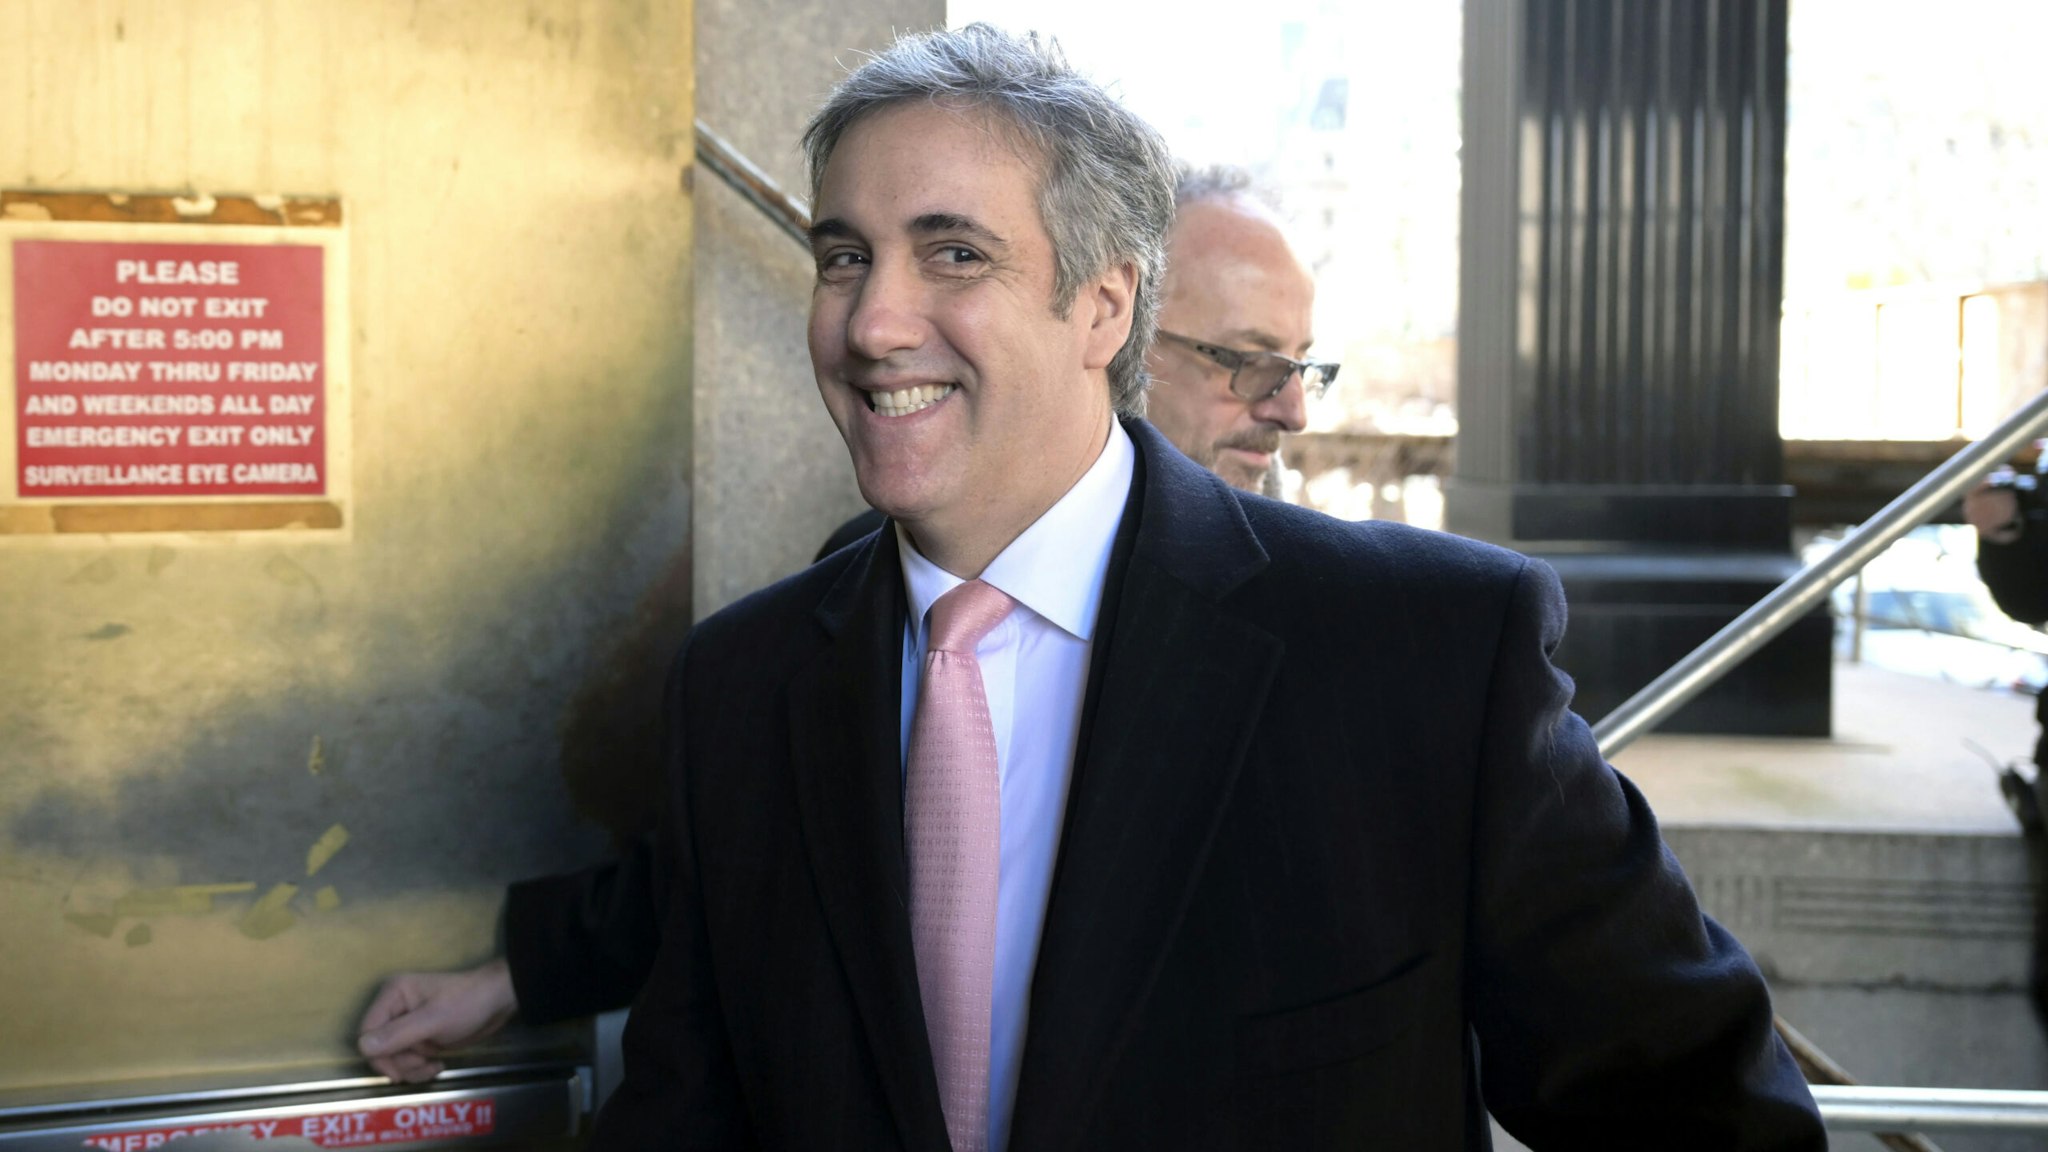 NEW YORK, UNITED STATES - MARCH 15: Michael Cohen, Donald Trump's former lawyer and fixer, walks out of a Manhattan courthouse after testifying before a grand jury, in New York, United States on March 15, 2023.